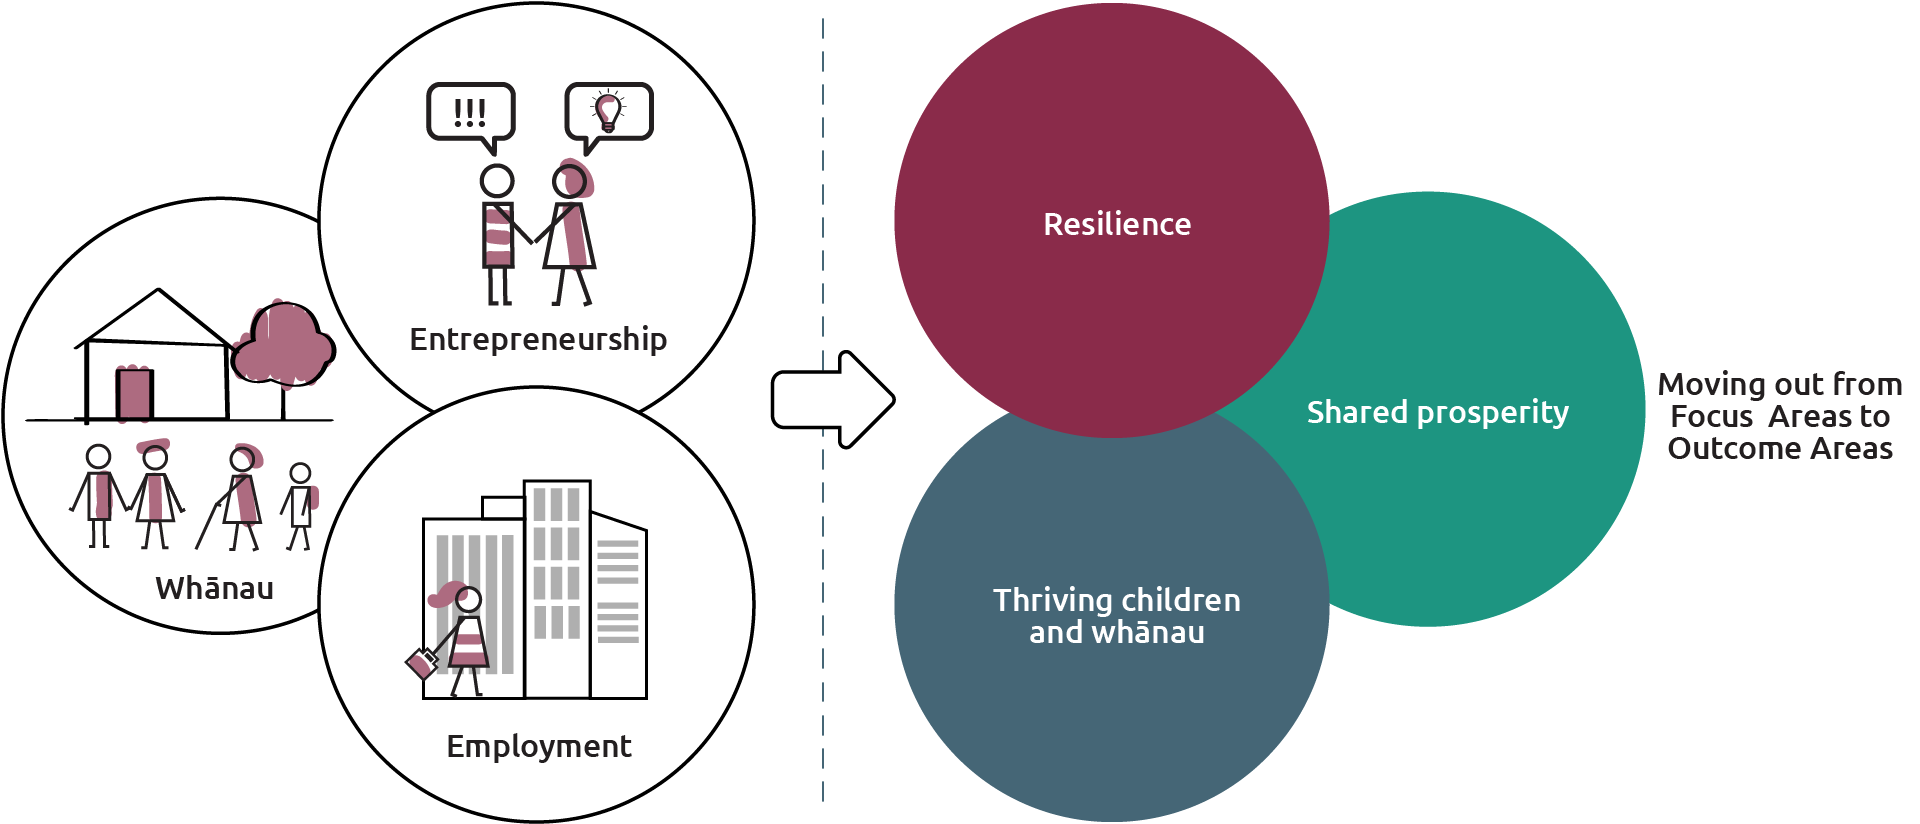 A diagram that illustrates how The Southern Initiative moves from focus areas to outcome areas. Whanau, Employment and Entrepreneurship moving to shared prosperity, resilience and thriving children and whanau